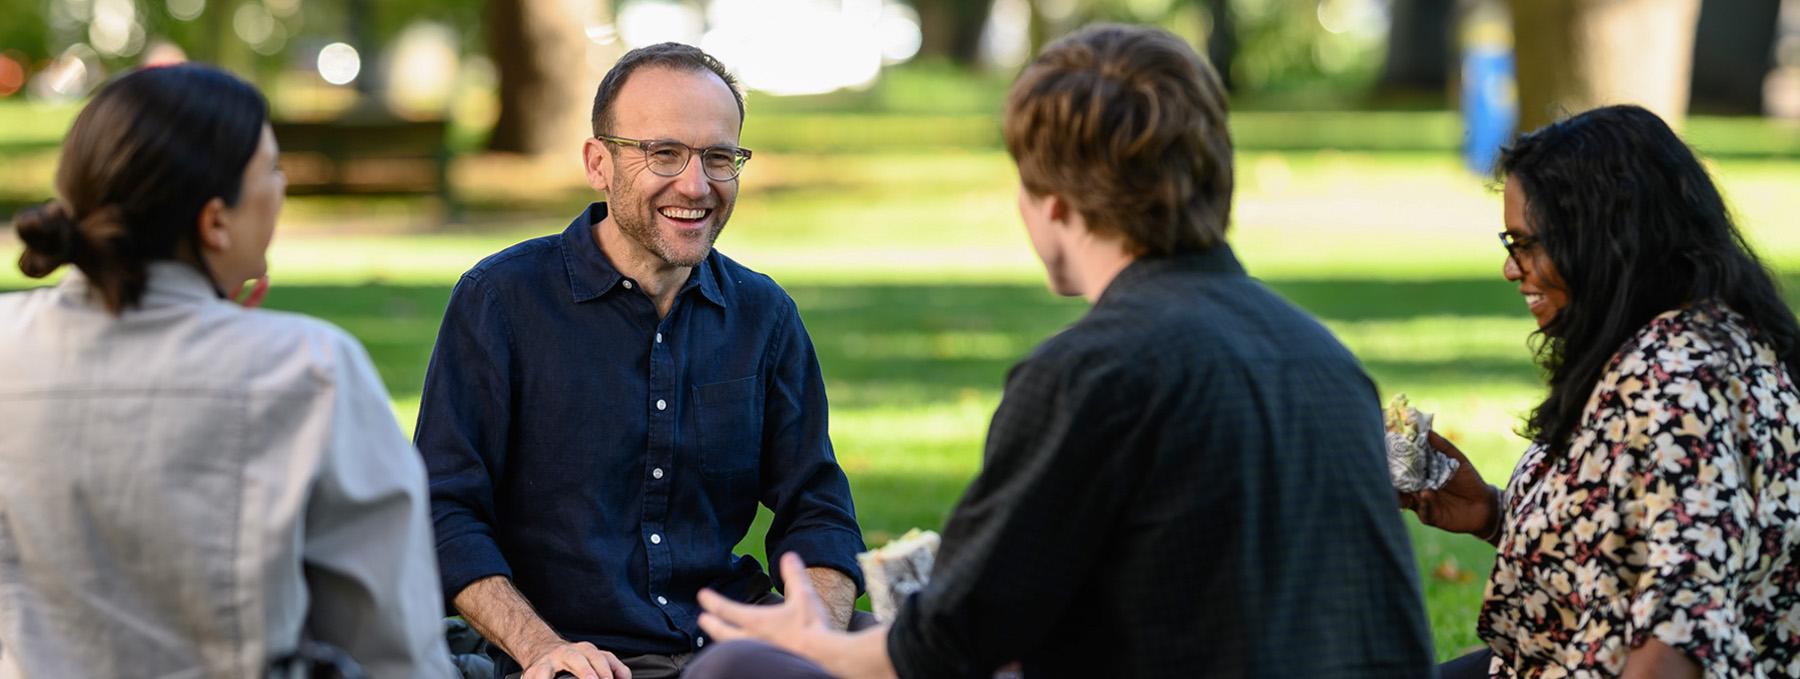 Adam Bandt smiling and sitting on the grass in a park chatting with locals